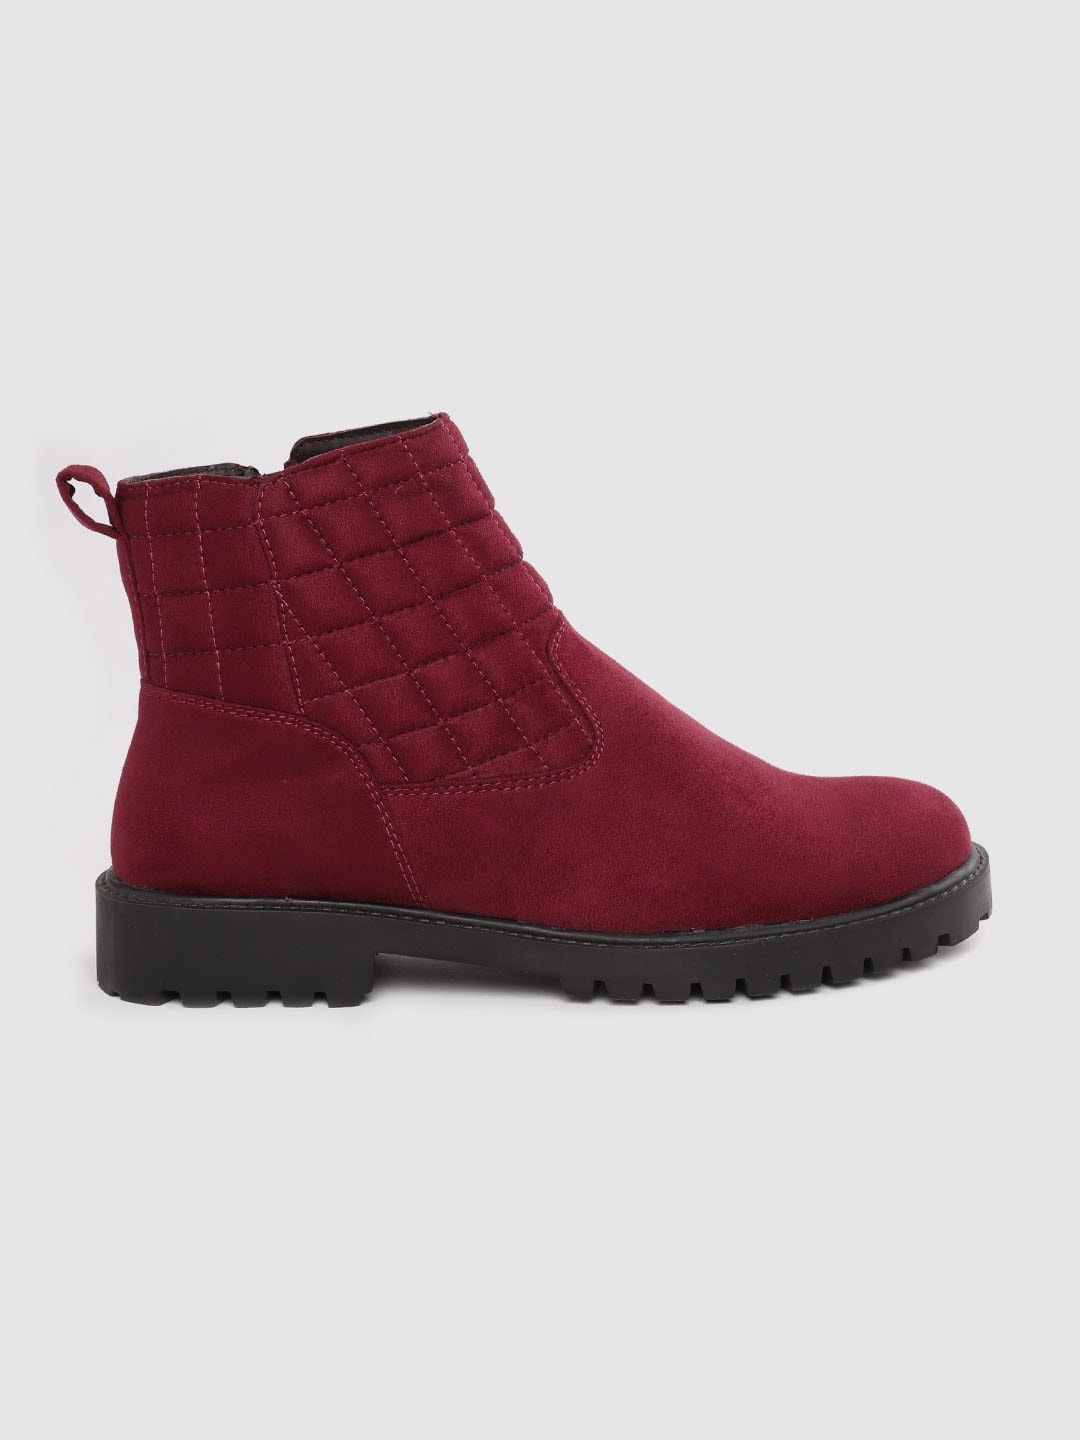 DressBerry Women Maroon Solid Suede Finish Mid-Top Flat Boots with Quilted Detail Price in India